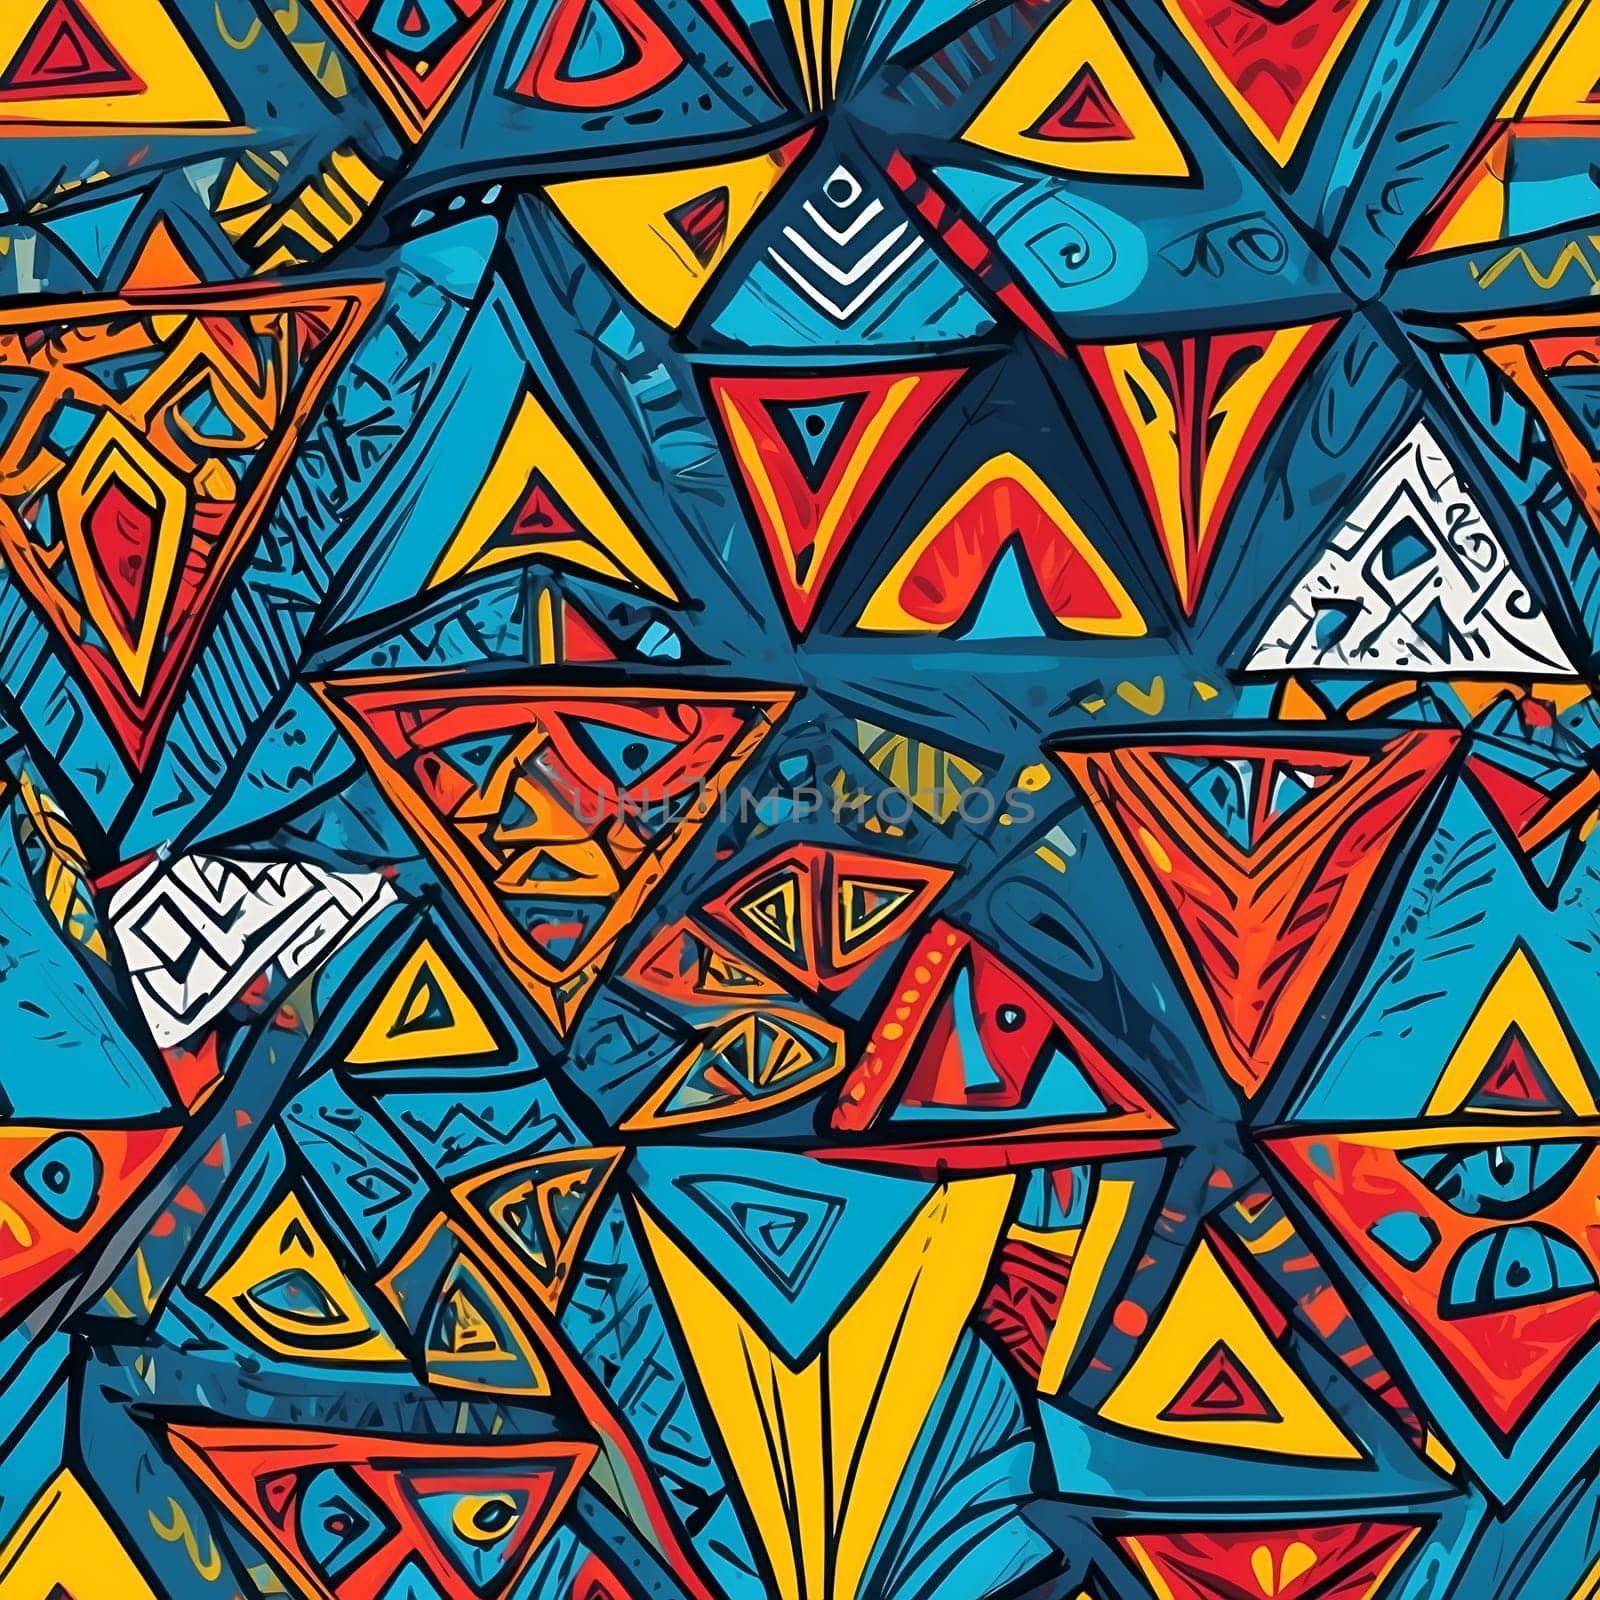 A vibrant and dynamic abstract painting featuring an array of different shapes arranged in a seamless pattern.